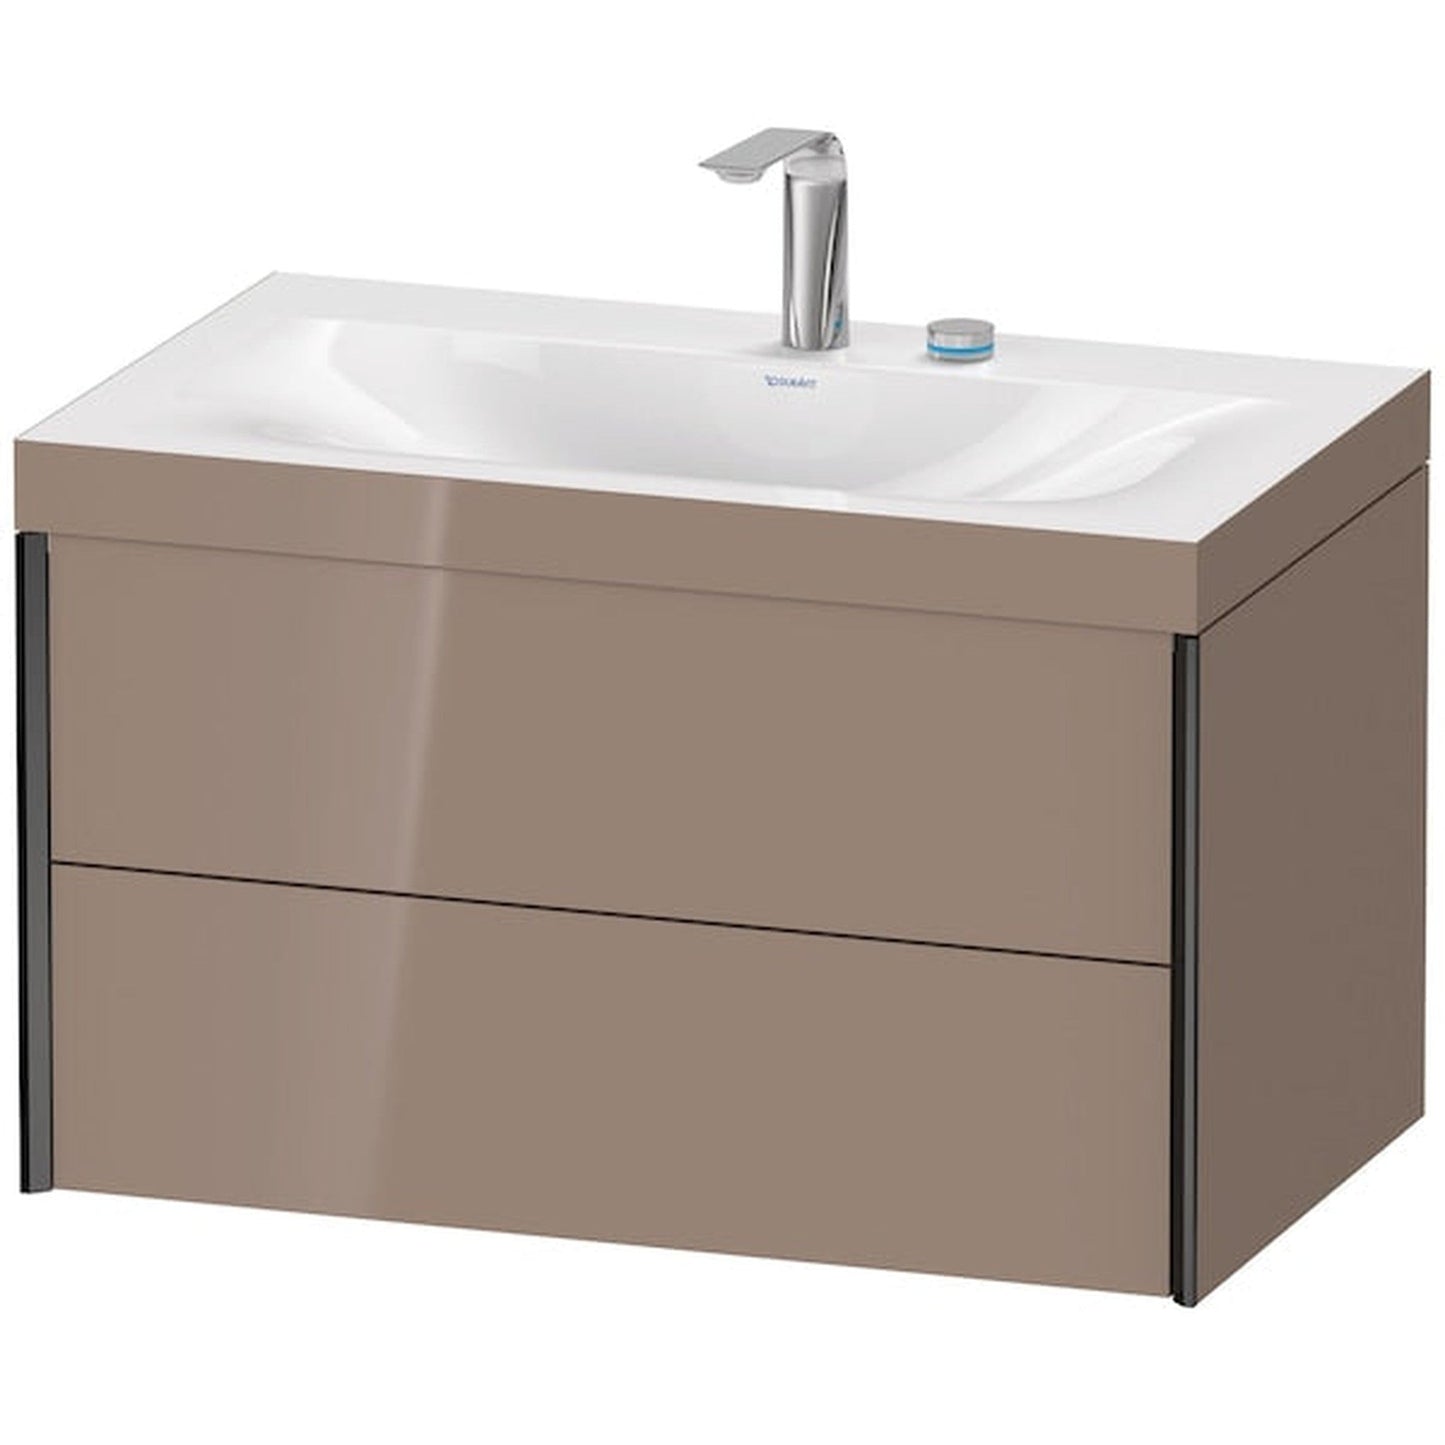 Duravit Xviu 31" x 20" x 19" Two Drawer C-Bonded Wall-Mount Vanity Kit With Two Tap Holes, Cappuccino (XV4615EB286C)